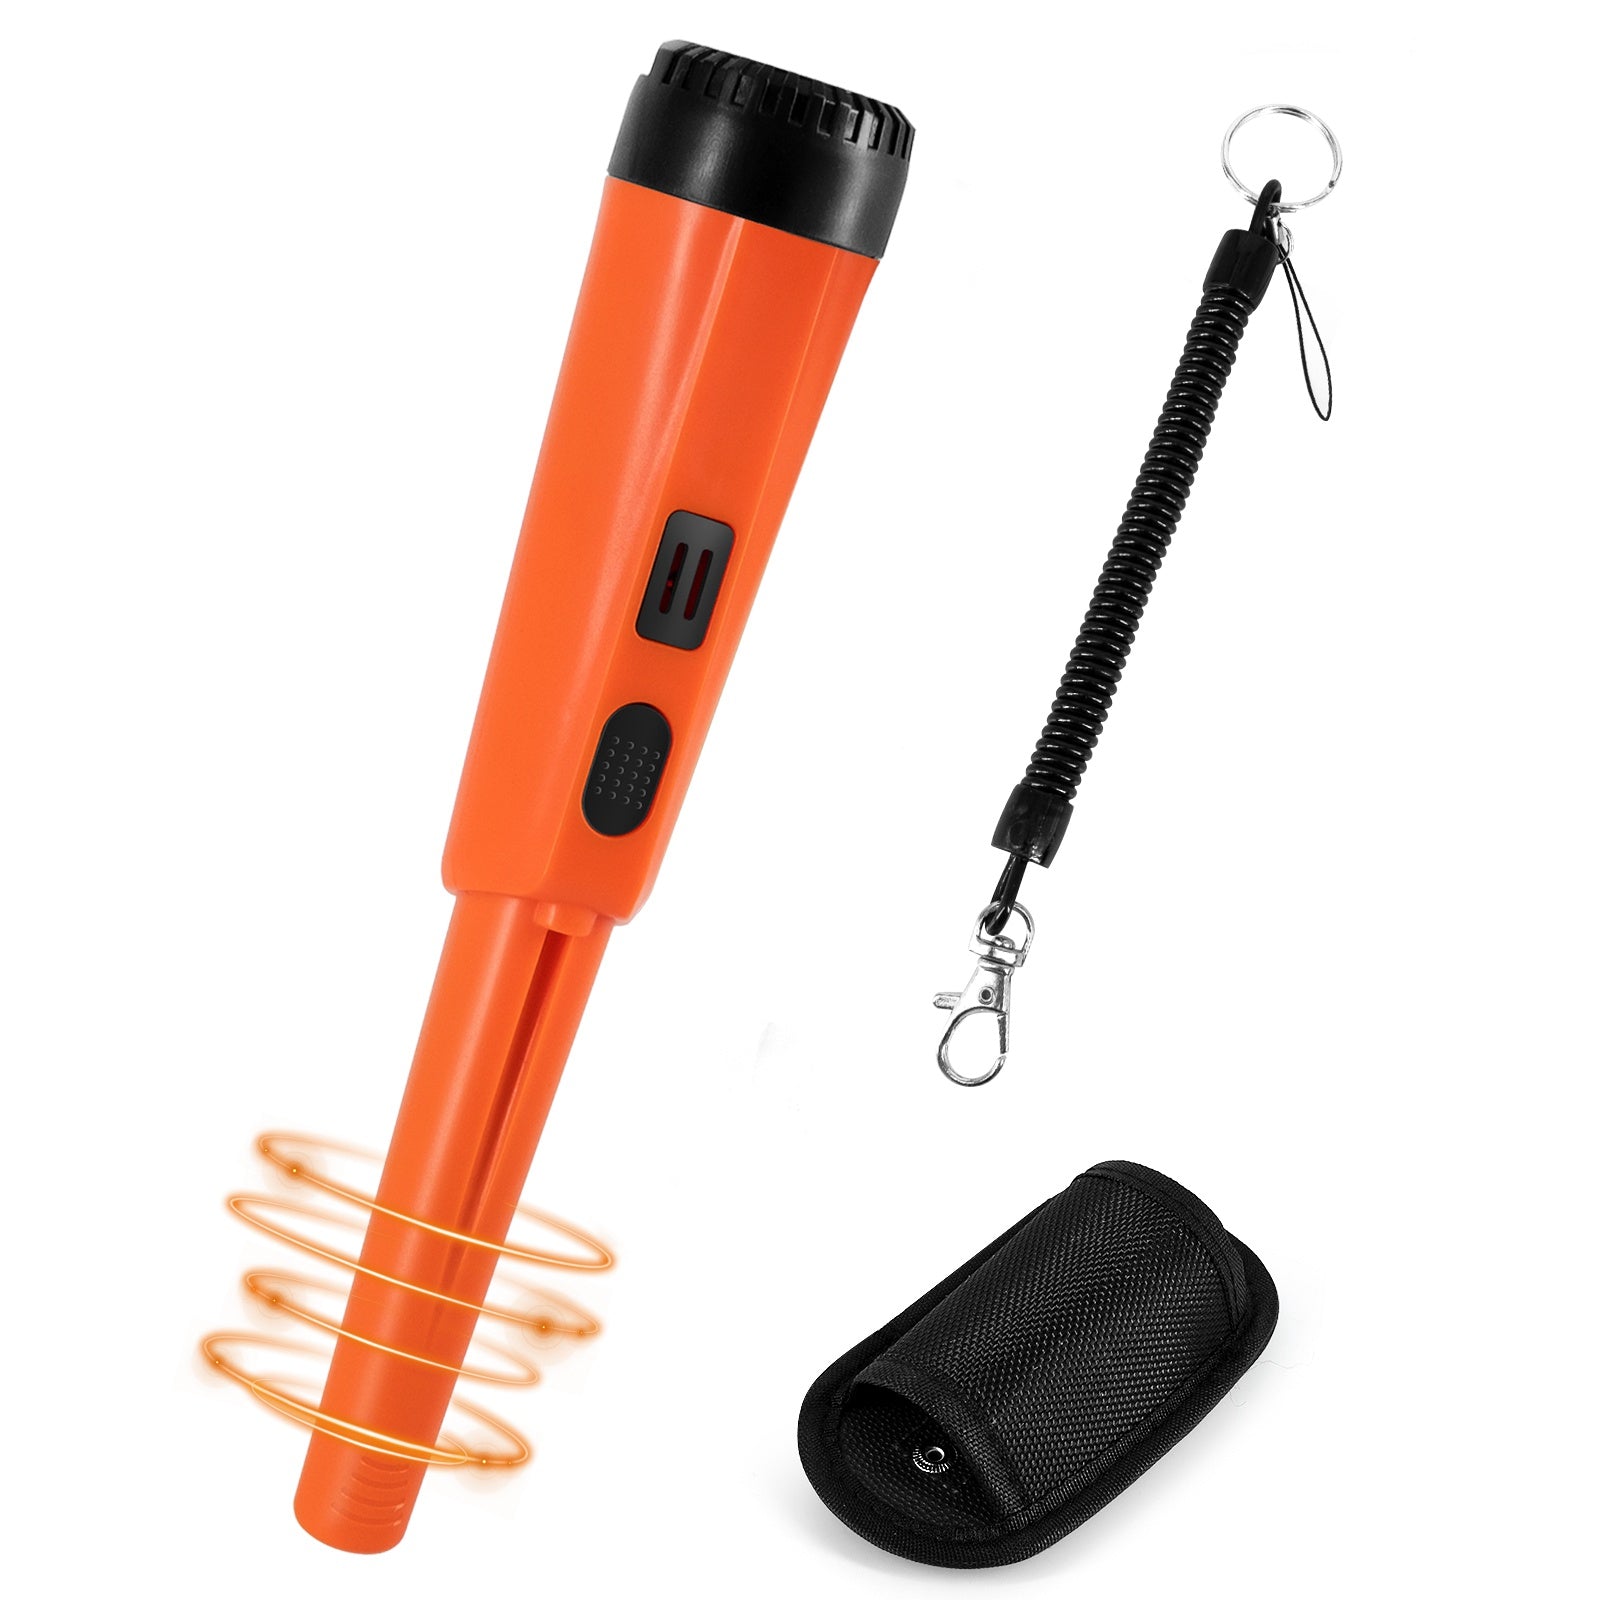 Handheld Metal Detector Pinpointer Portable Pin Pointer Wand Search Treasure Finder Probe with LCD Display for Adults Kids (No Battery, No Waterproof Bag) - Orange